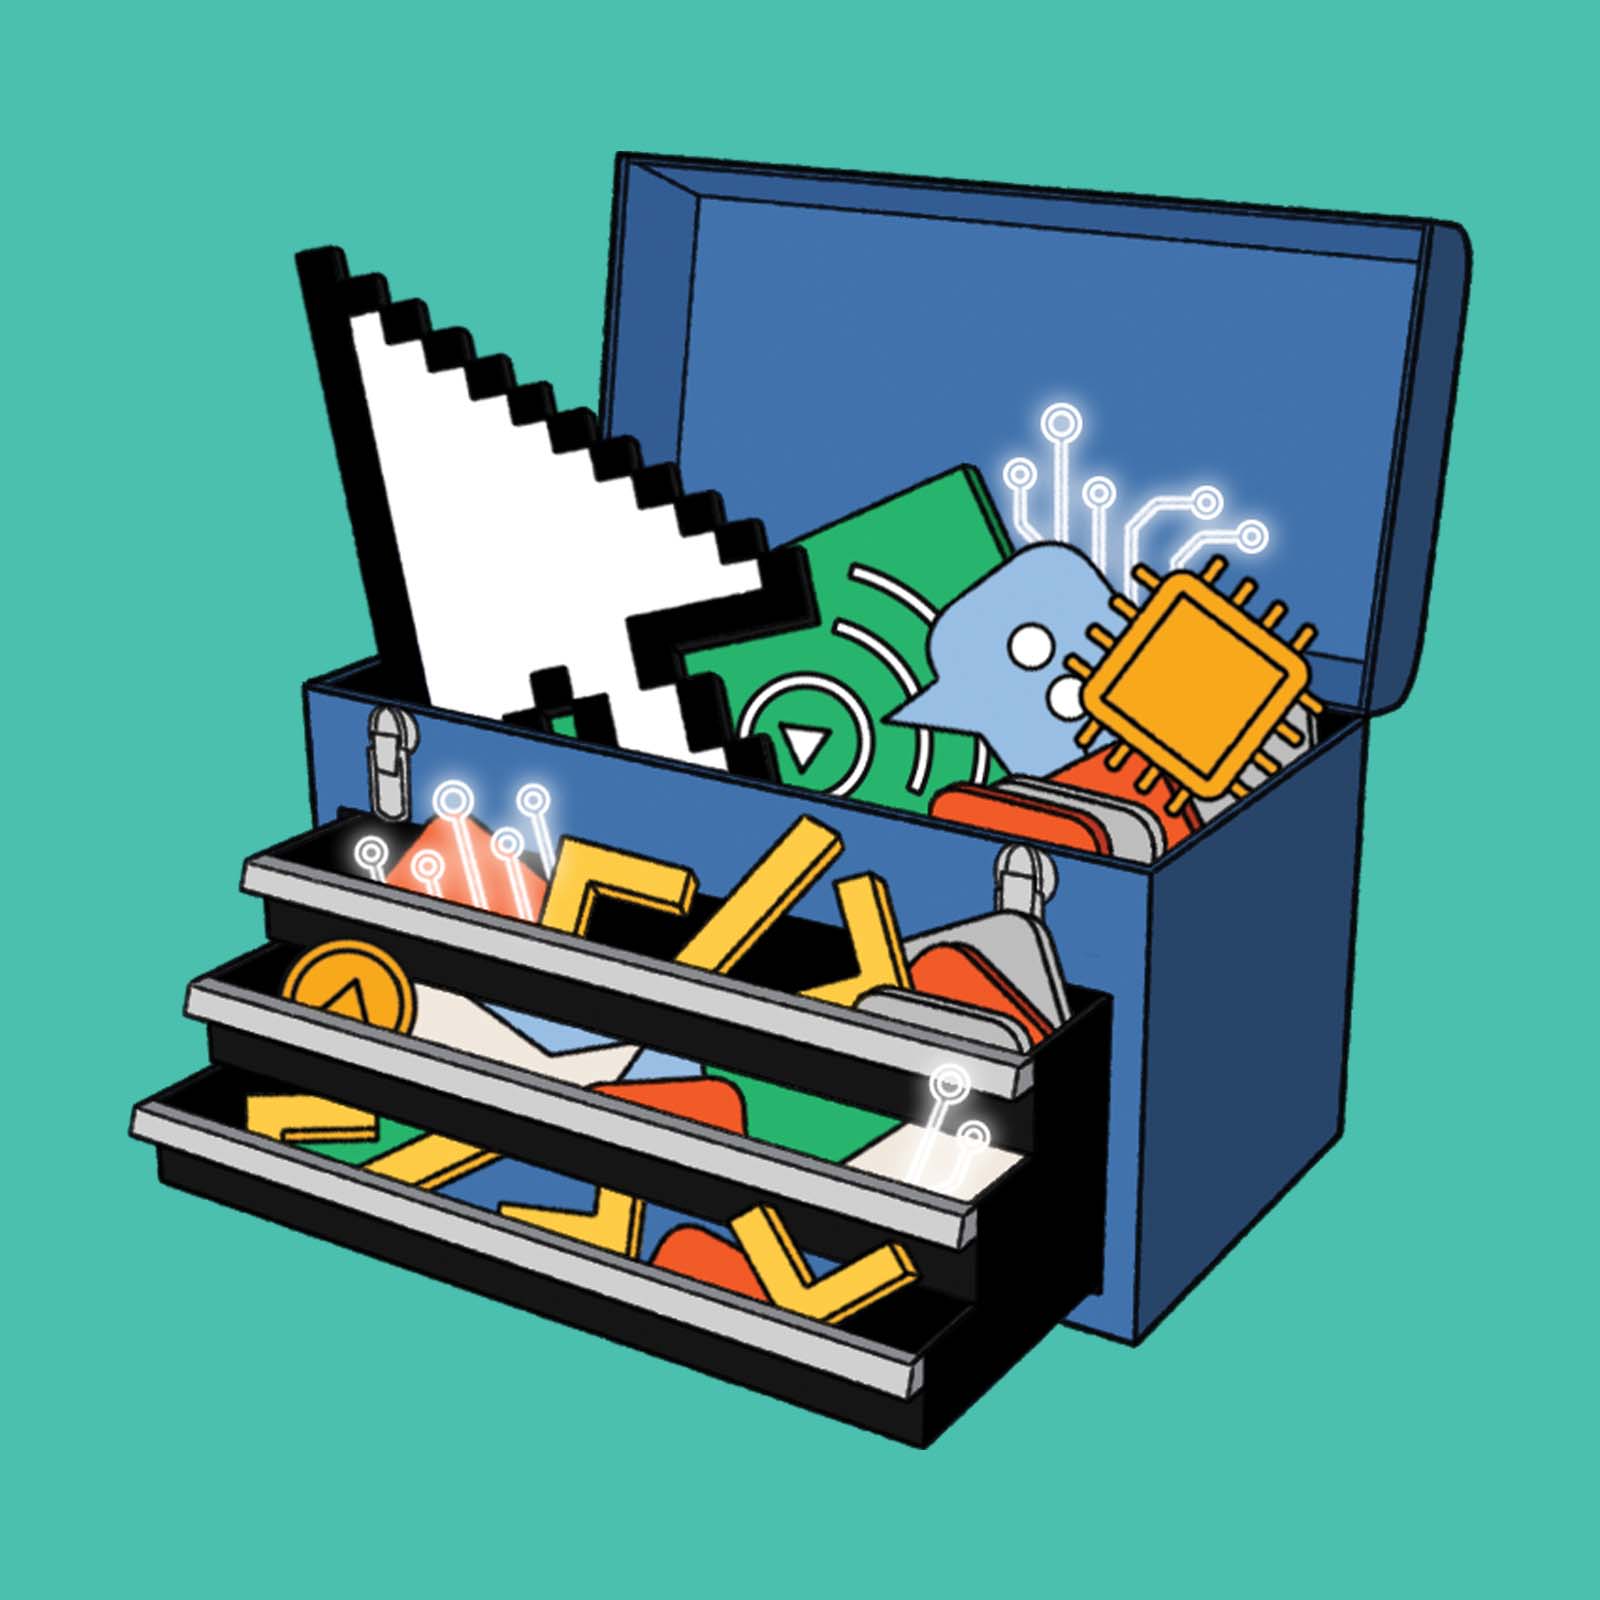 The toolbox: boost your digital skills